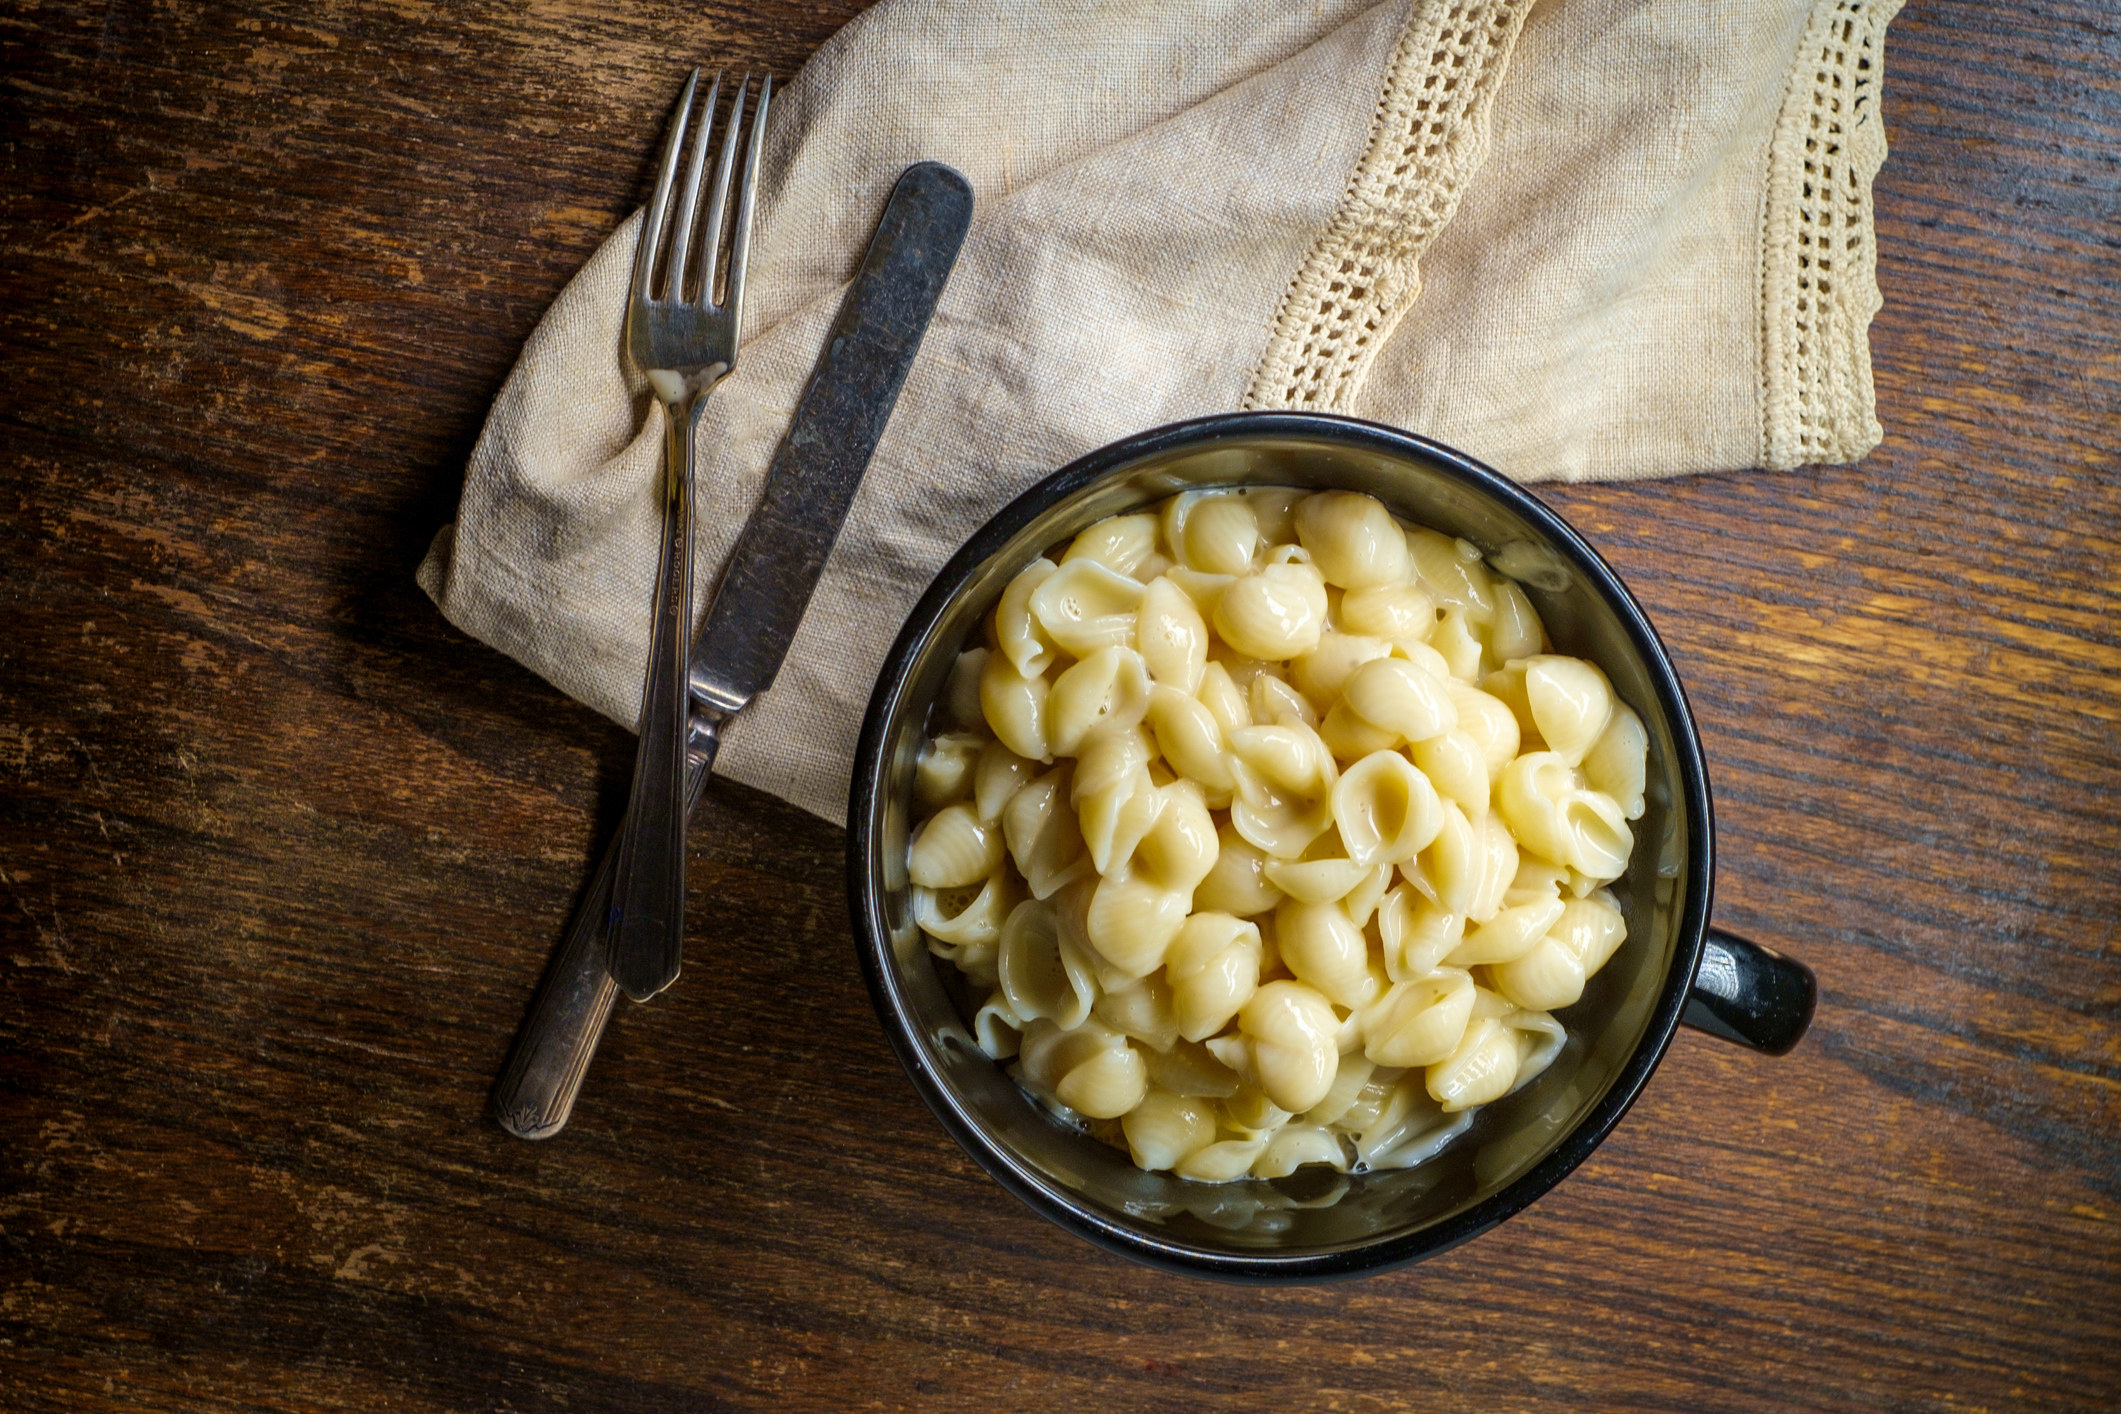 Bowl of pasta and cheese on a wooden table with a fork and napkin beside it